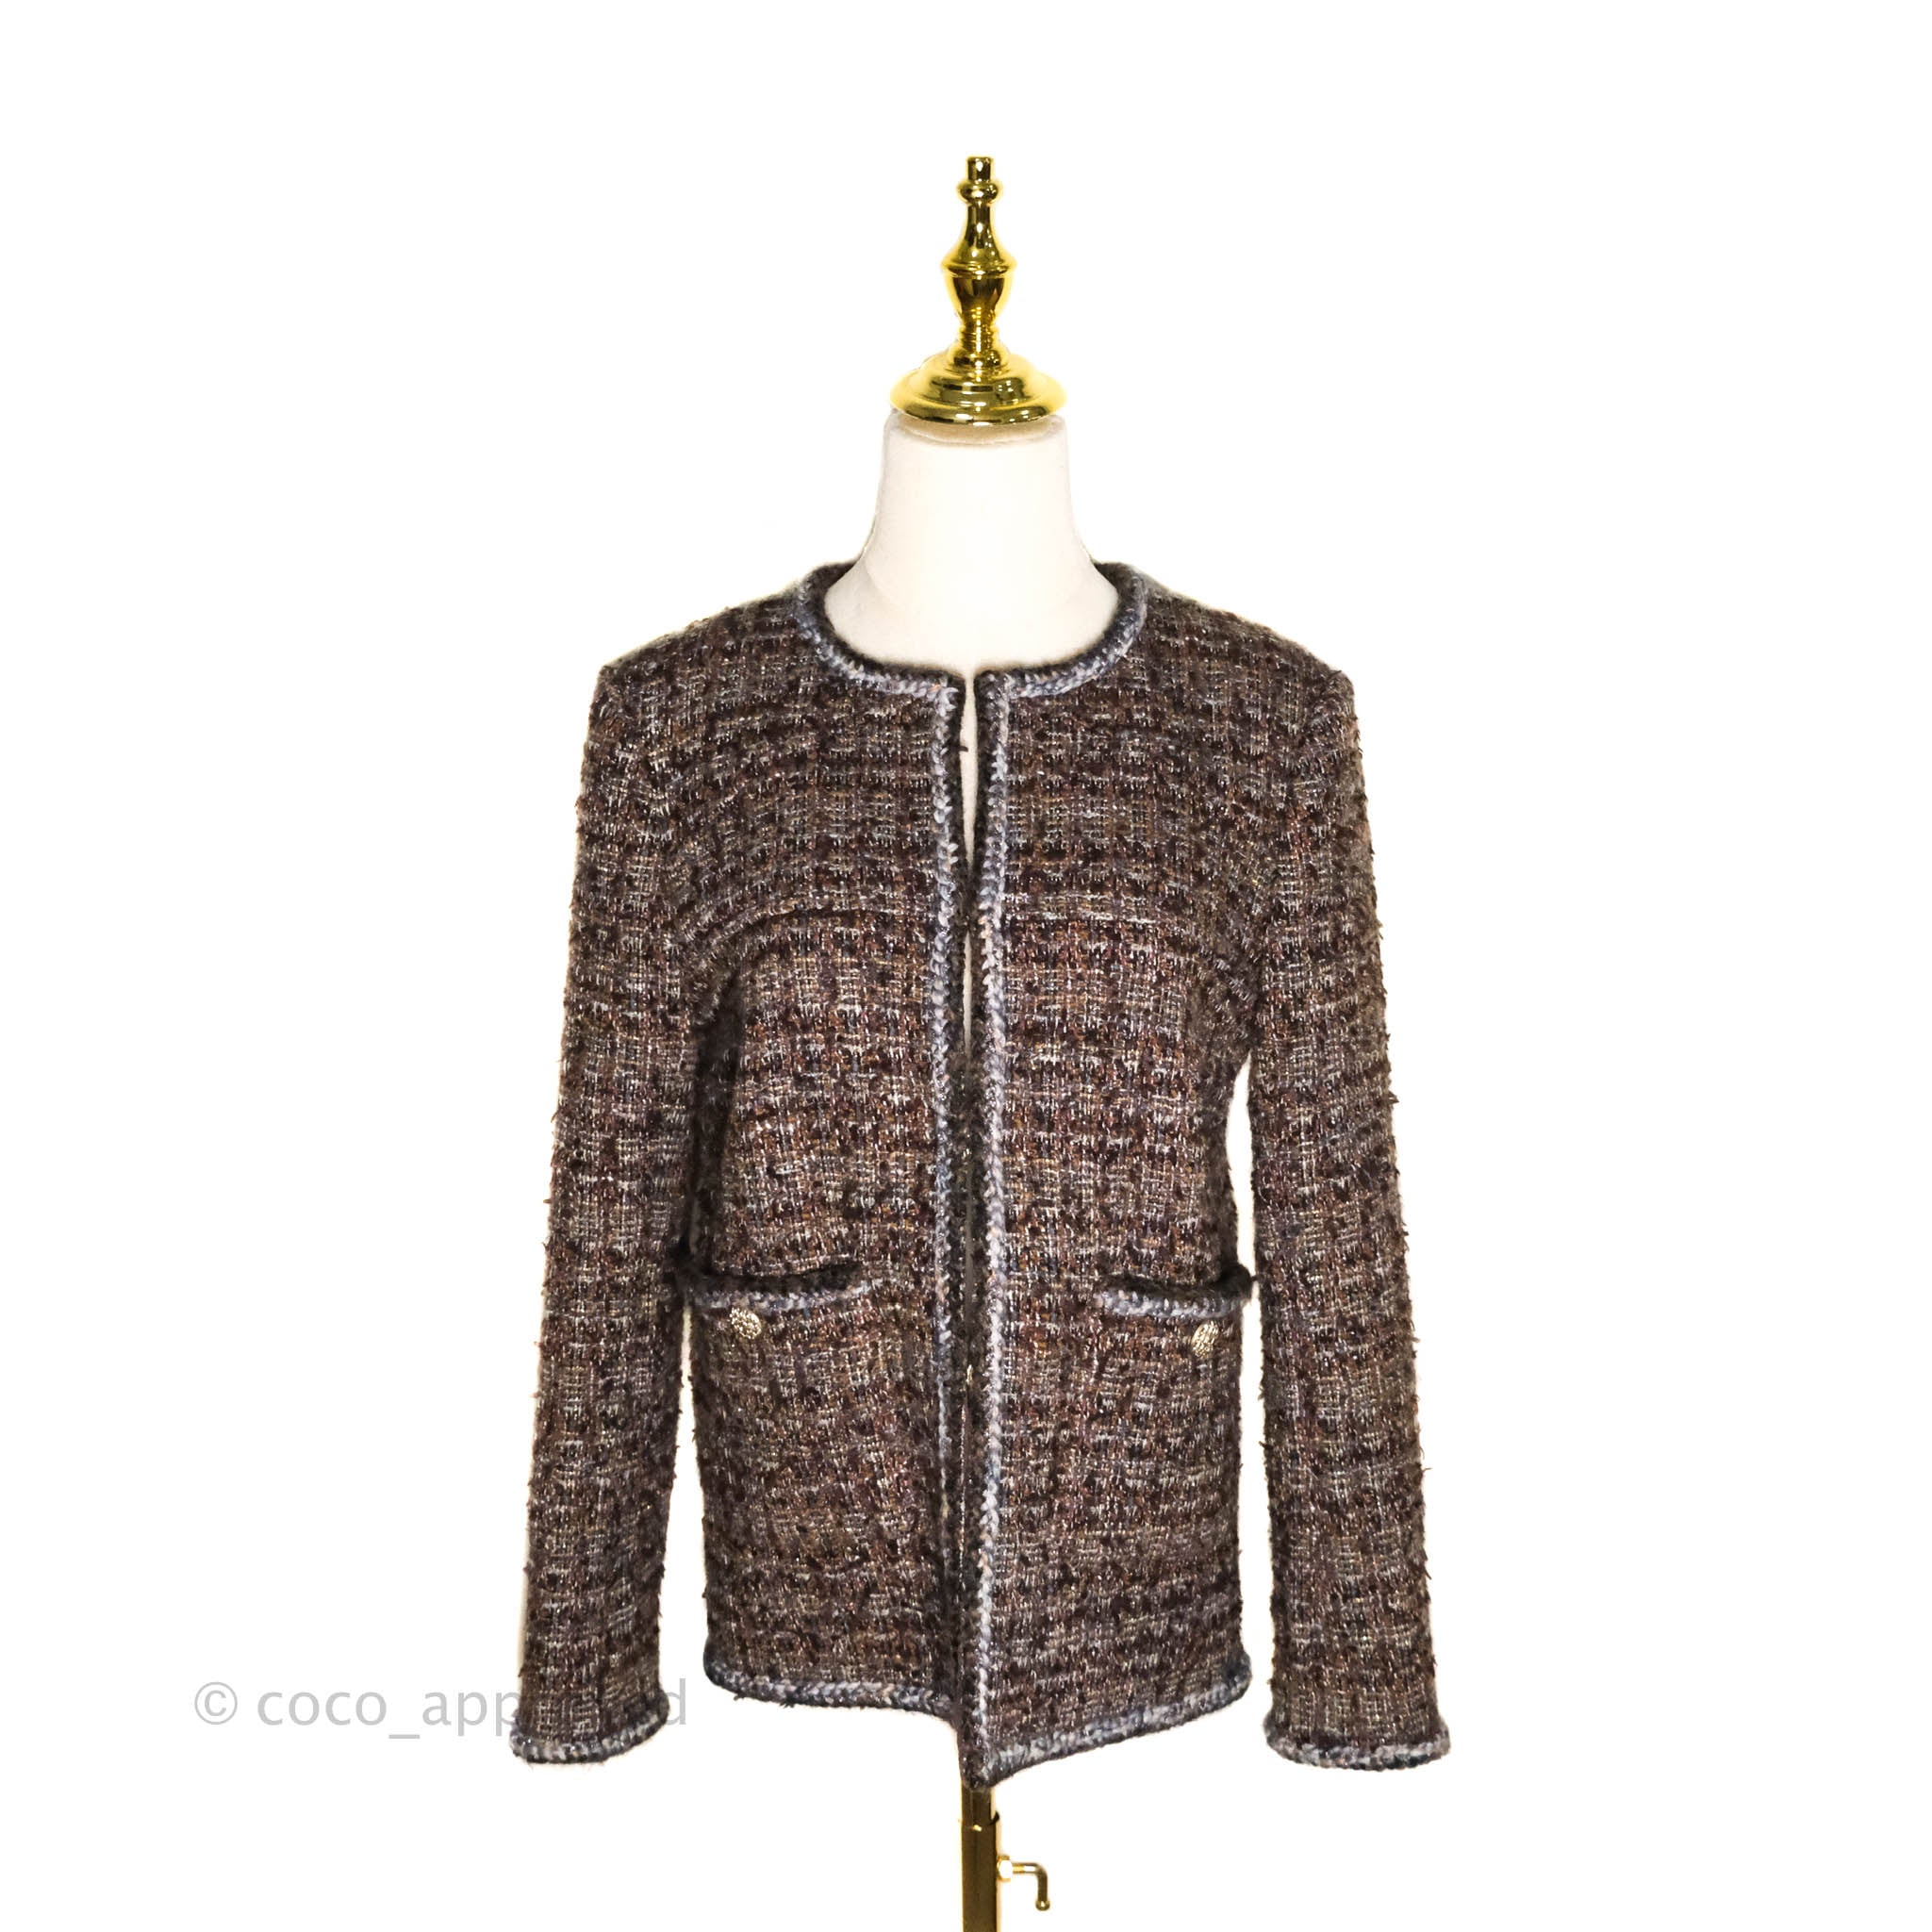 Chanel Tweed Jacket in Brown 2018-19F/W – Coco Approved Studio